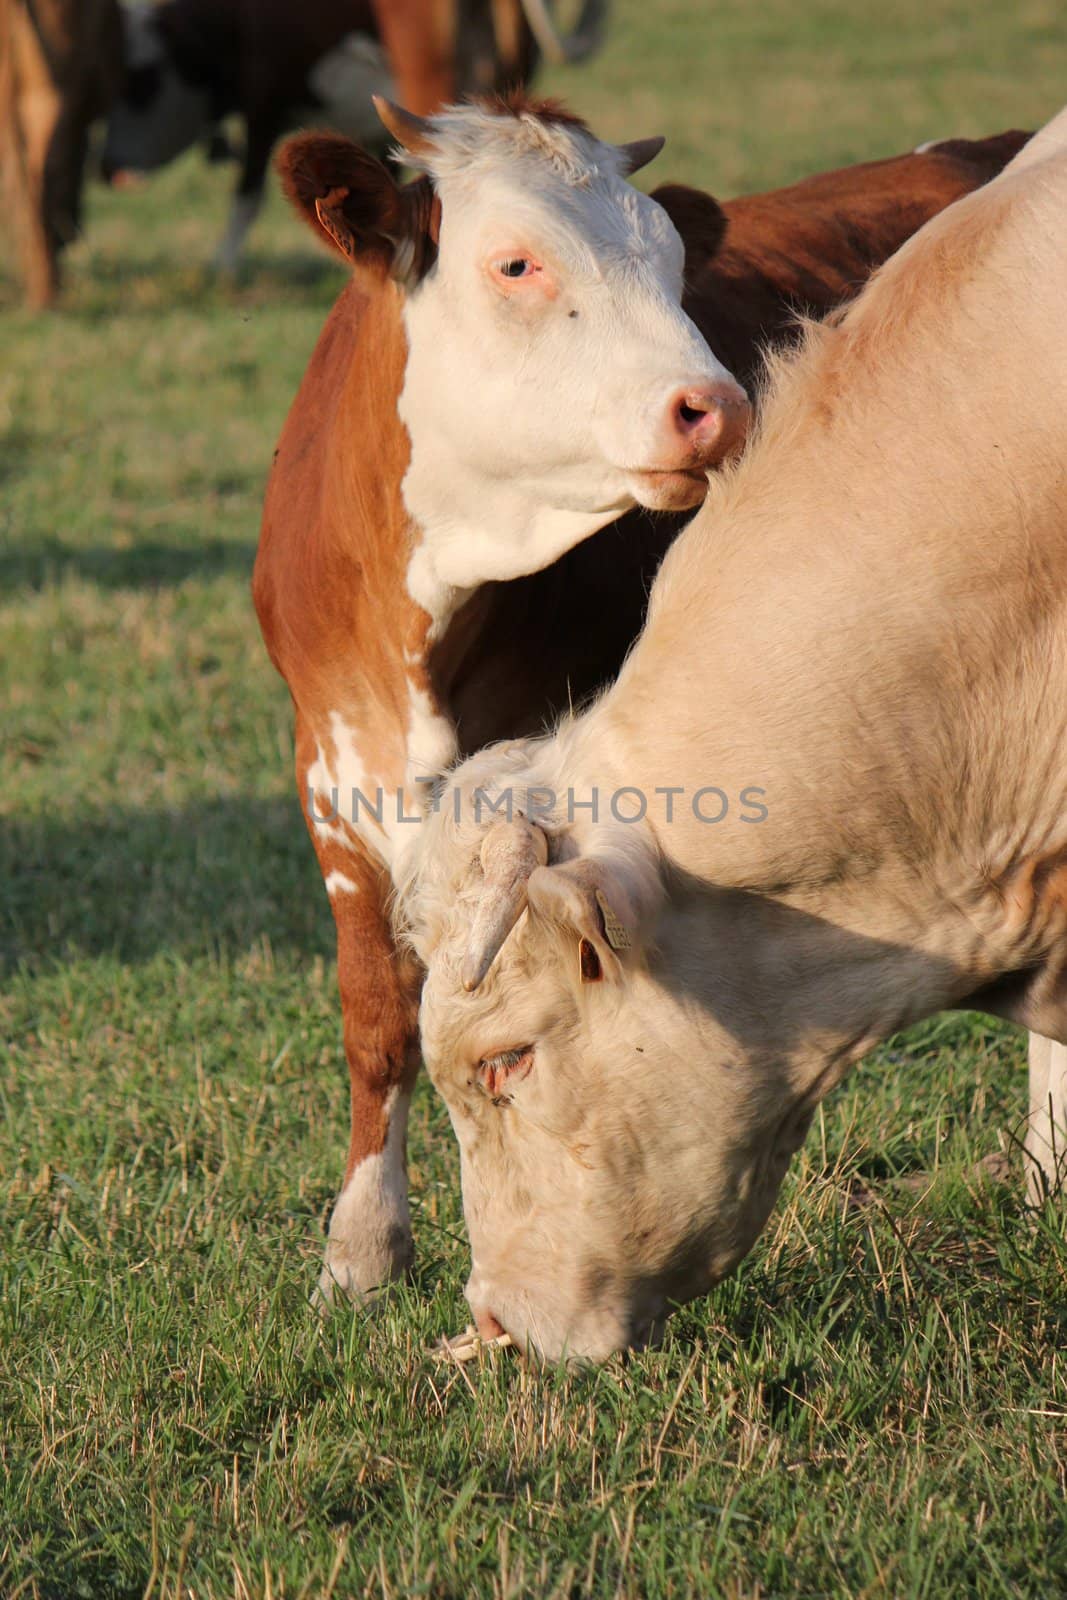 A young calf next to its mother, their head very near, in a meadow